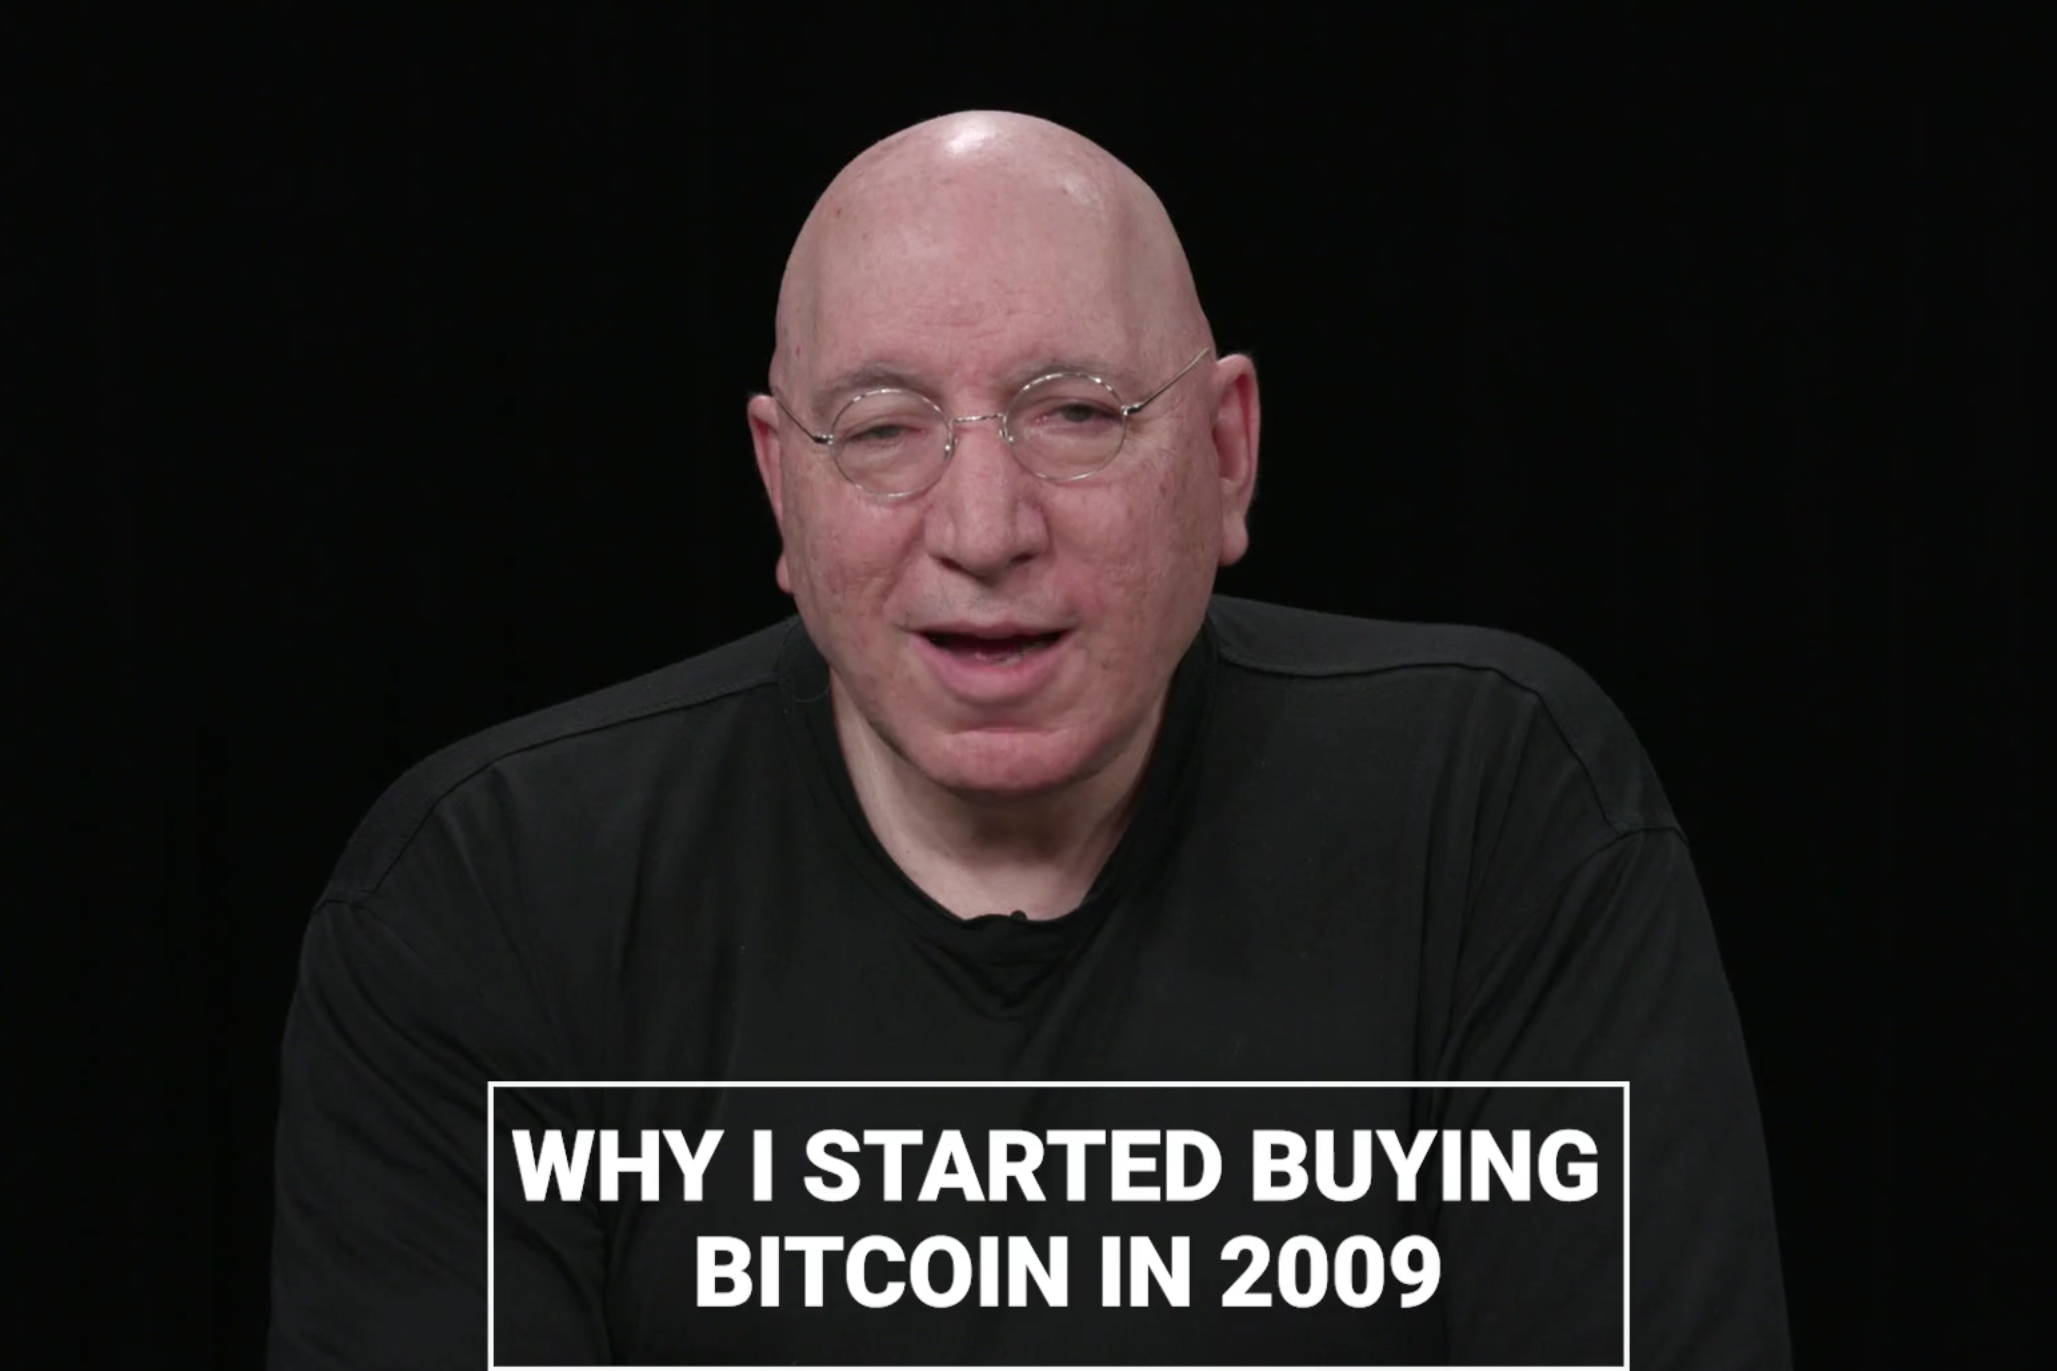 Meet the Man Who Bought Bitcoin in 2009